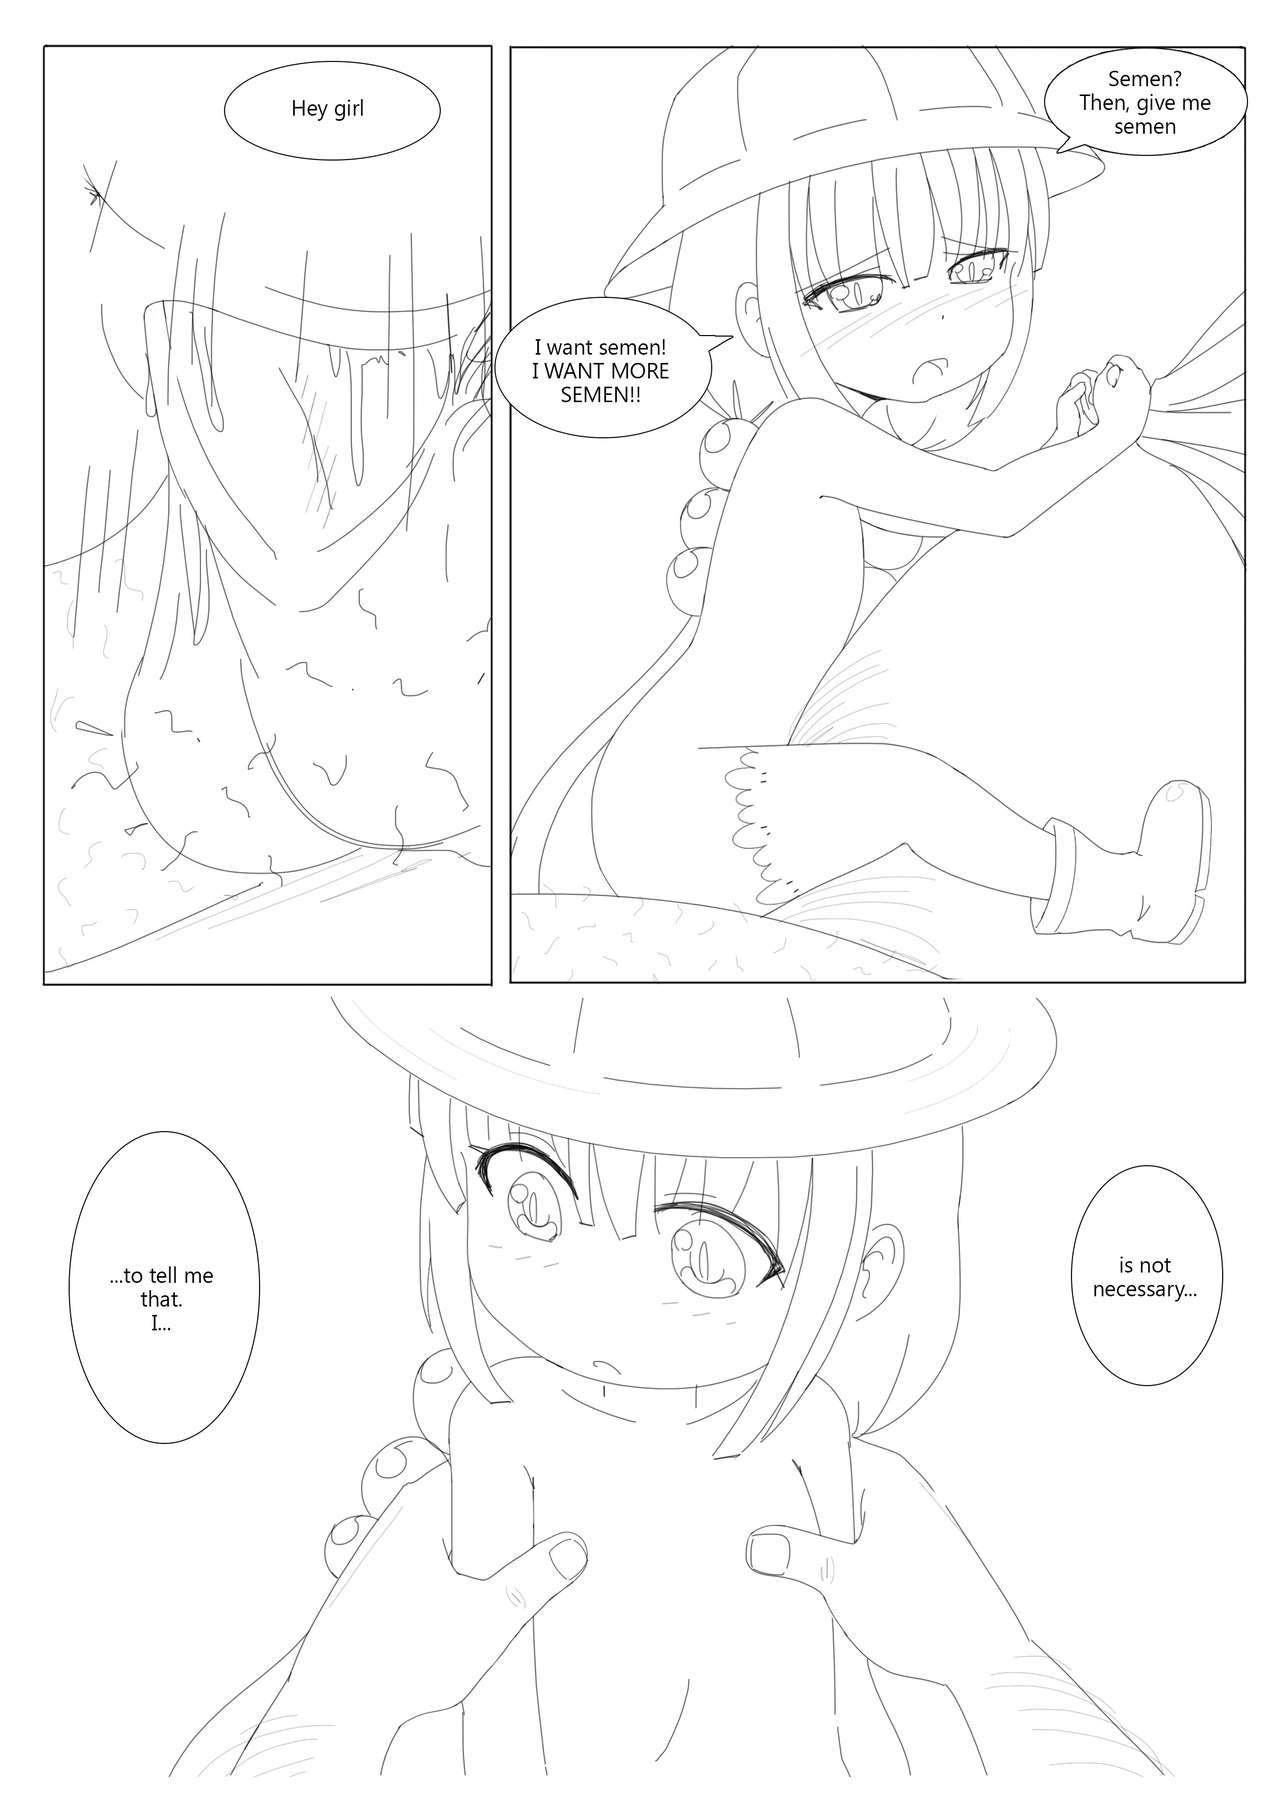 ComicTED Vol 2 [放射性ゴキブリ] Ted The Ero Dinasty（The Cum Hungry Dragon Loli）